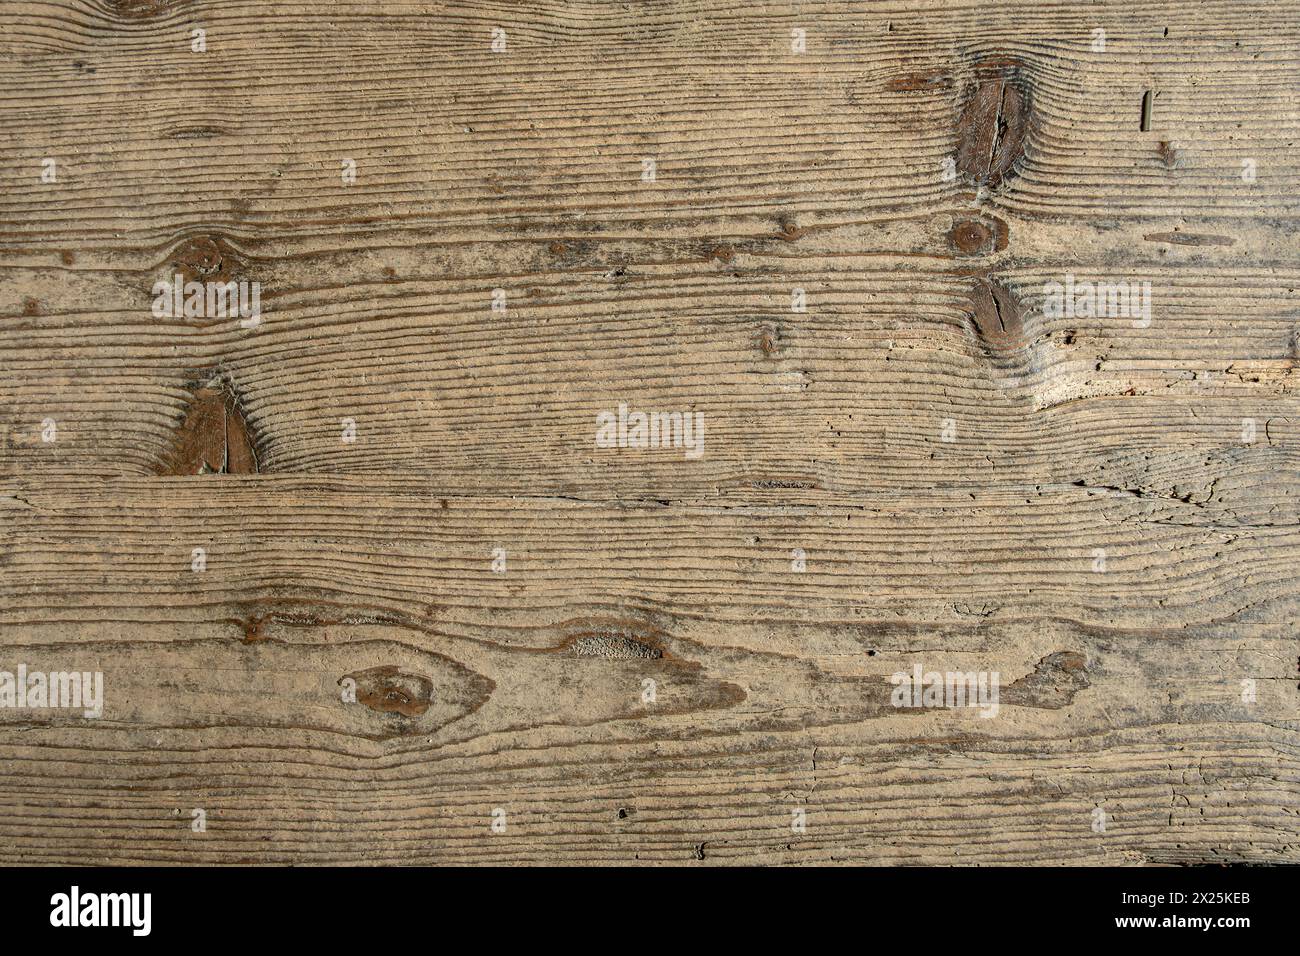 Scuffed, shabby wooden surface, background. Stock Photo